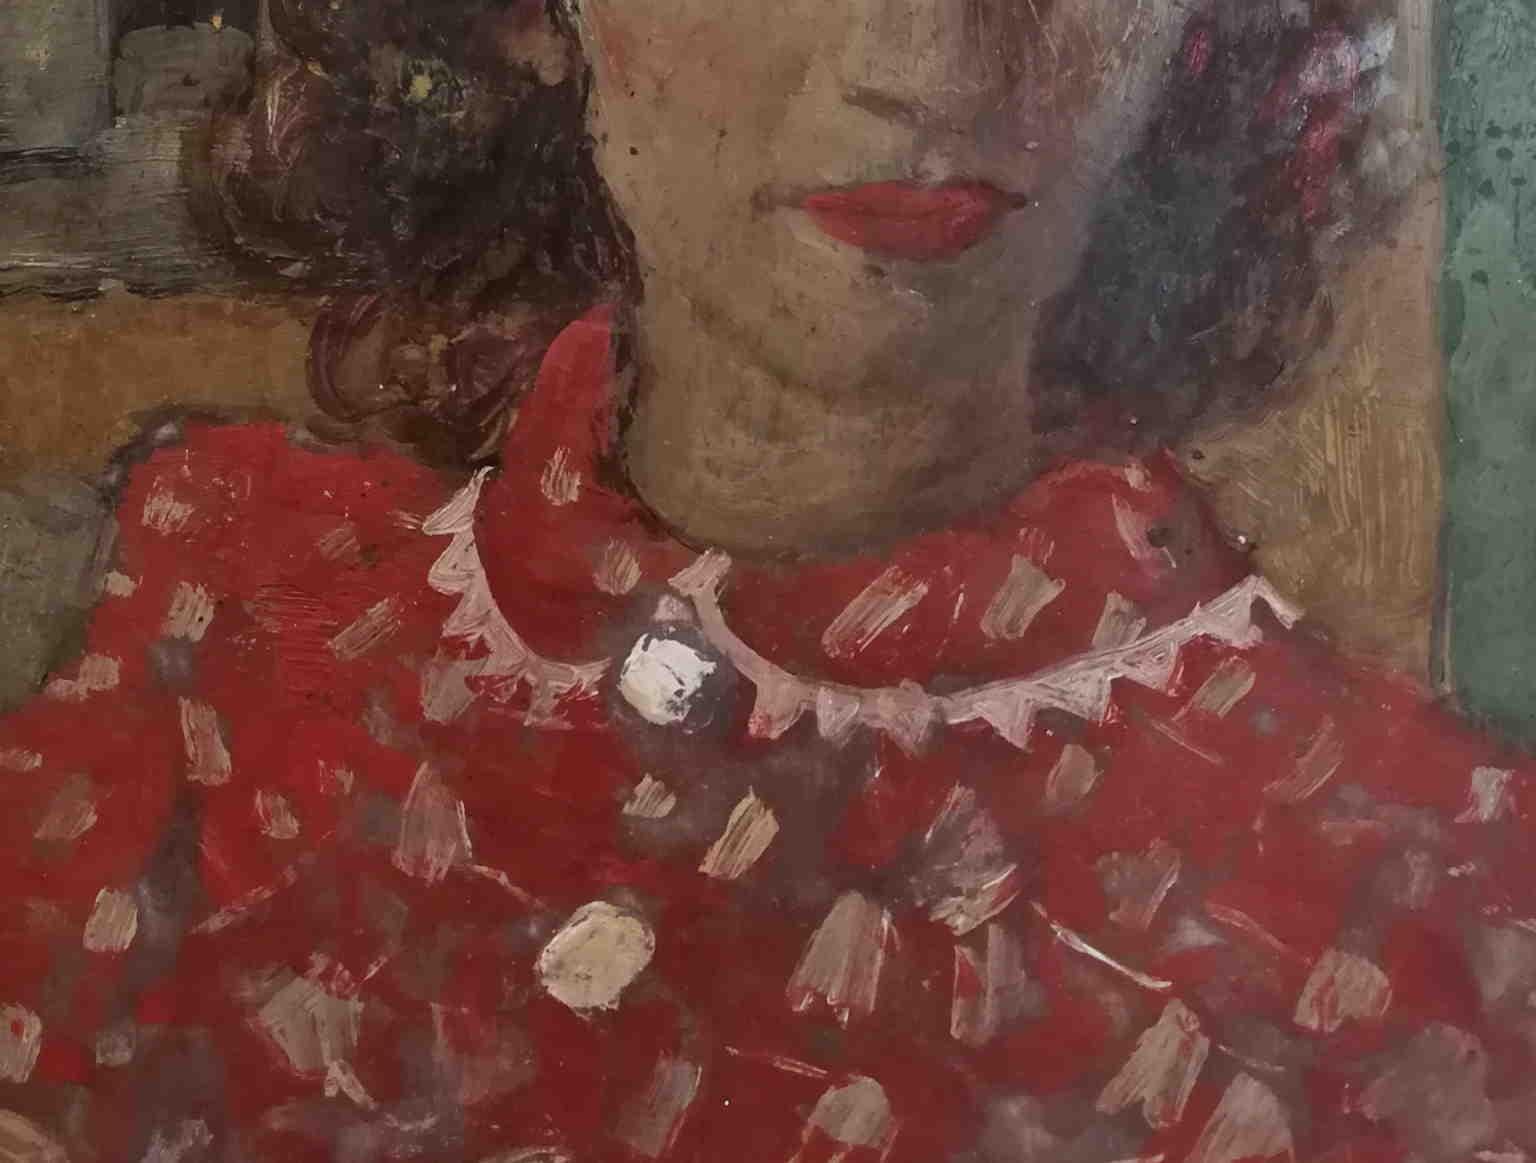 The painting is a portrait of an unknown lady, here depicted with a with an absorbed look. The intense red lipstick, matching with the the dress-allusion to fire and passion-creates a strong contradiction with the the sober and plain style, and the